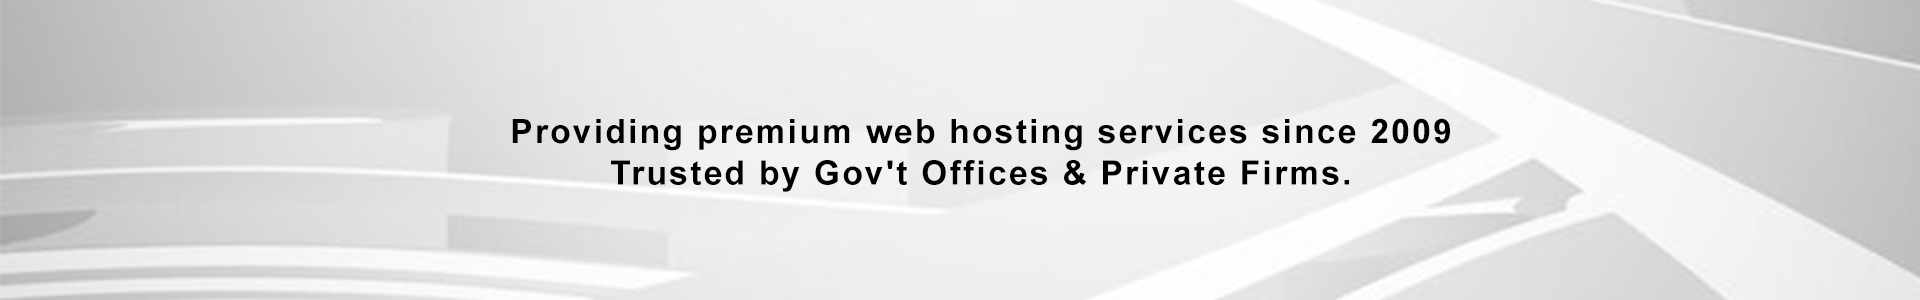 web hosting provided trusted by govt agencies and private firms